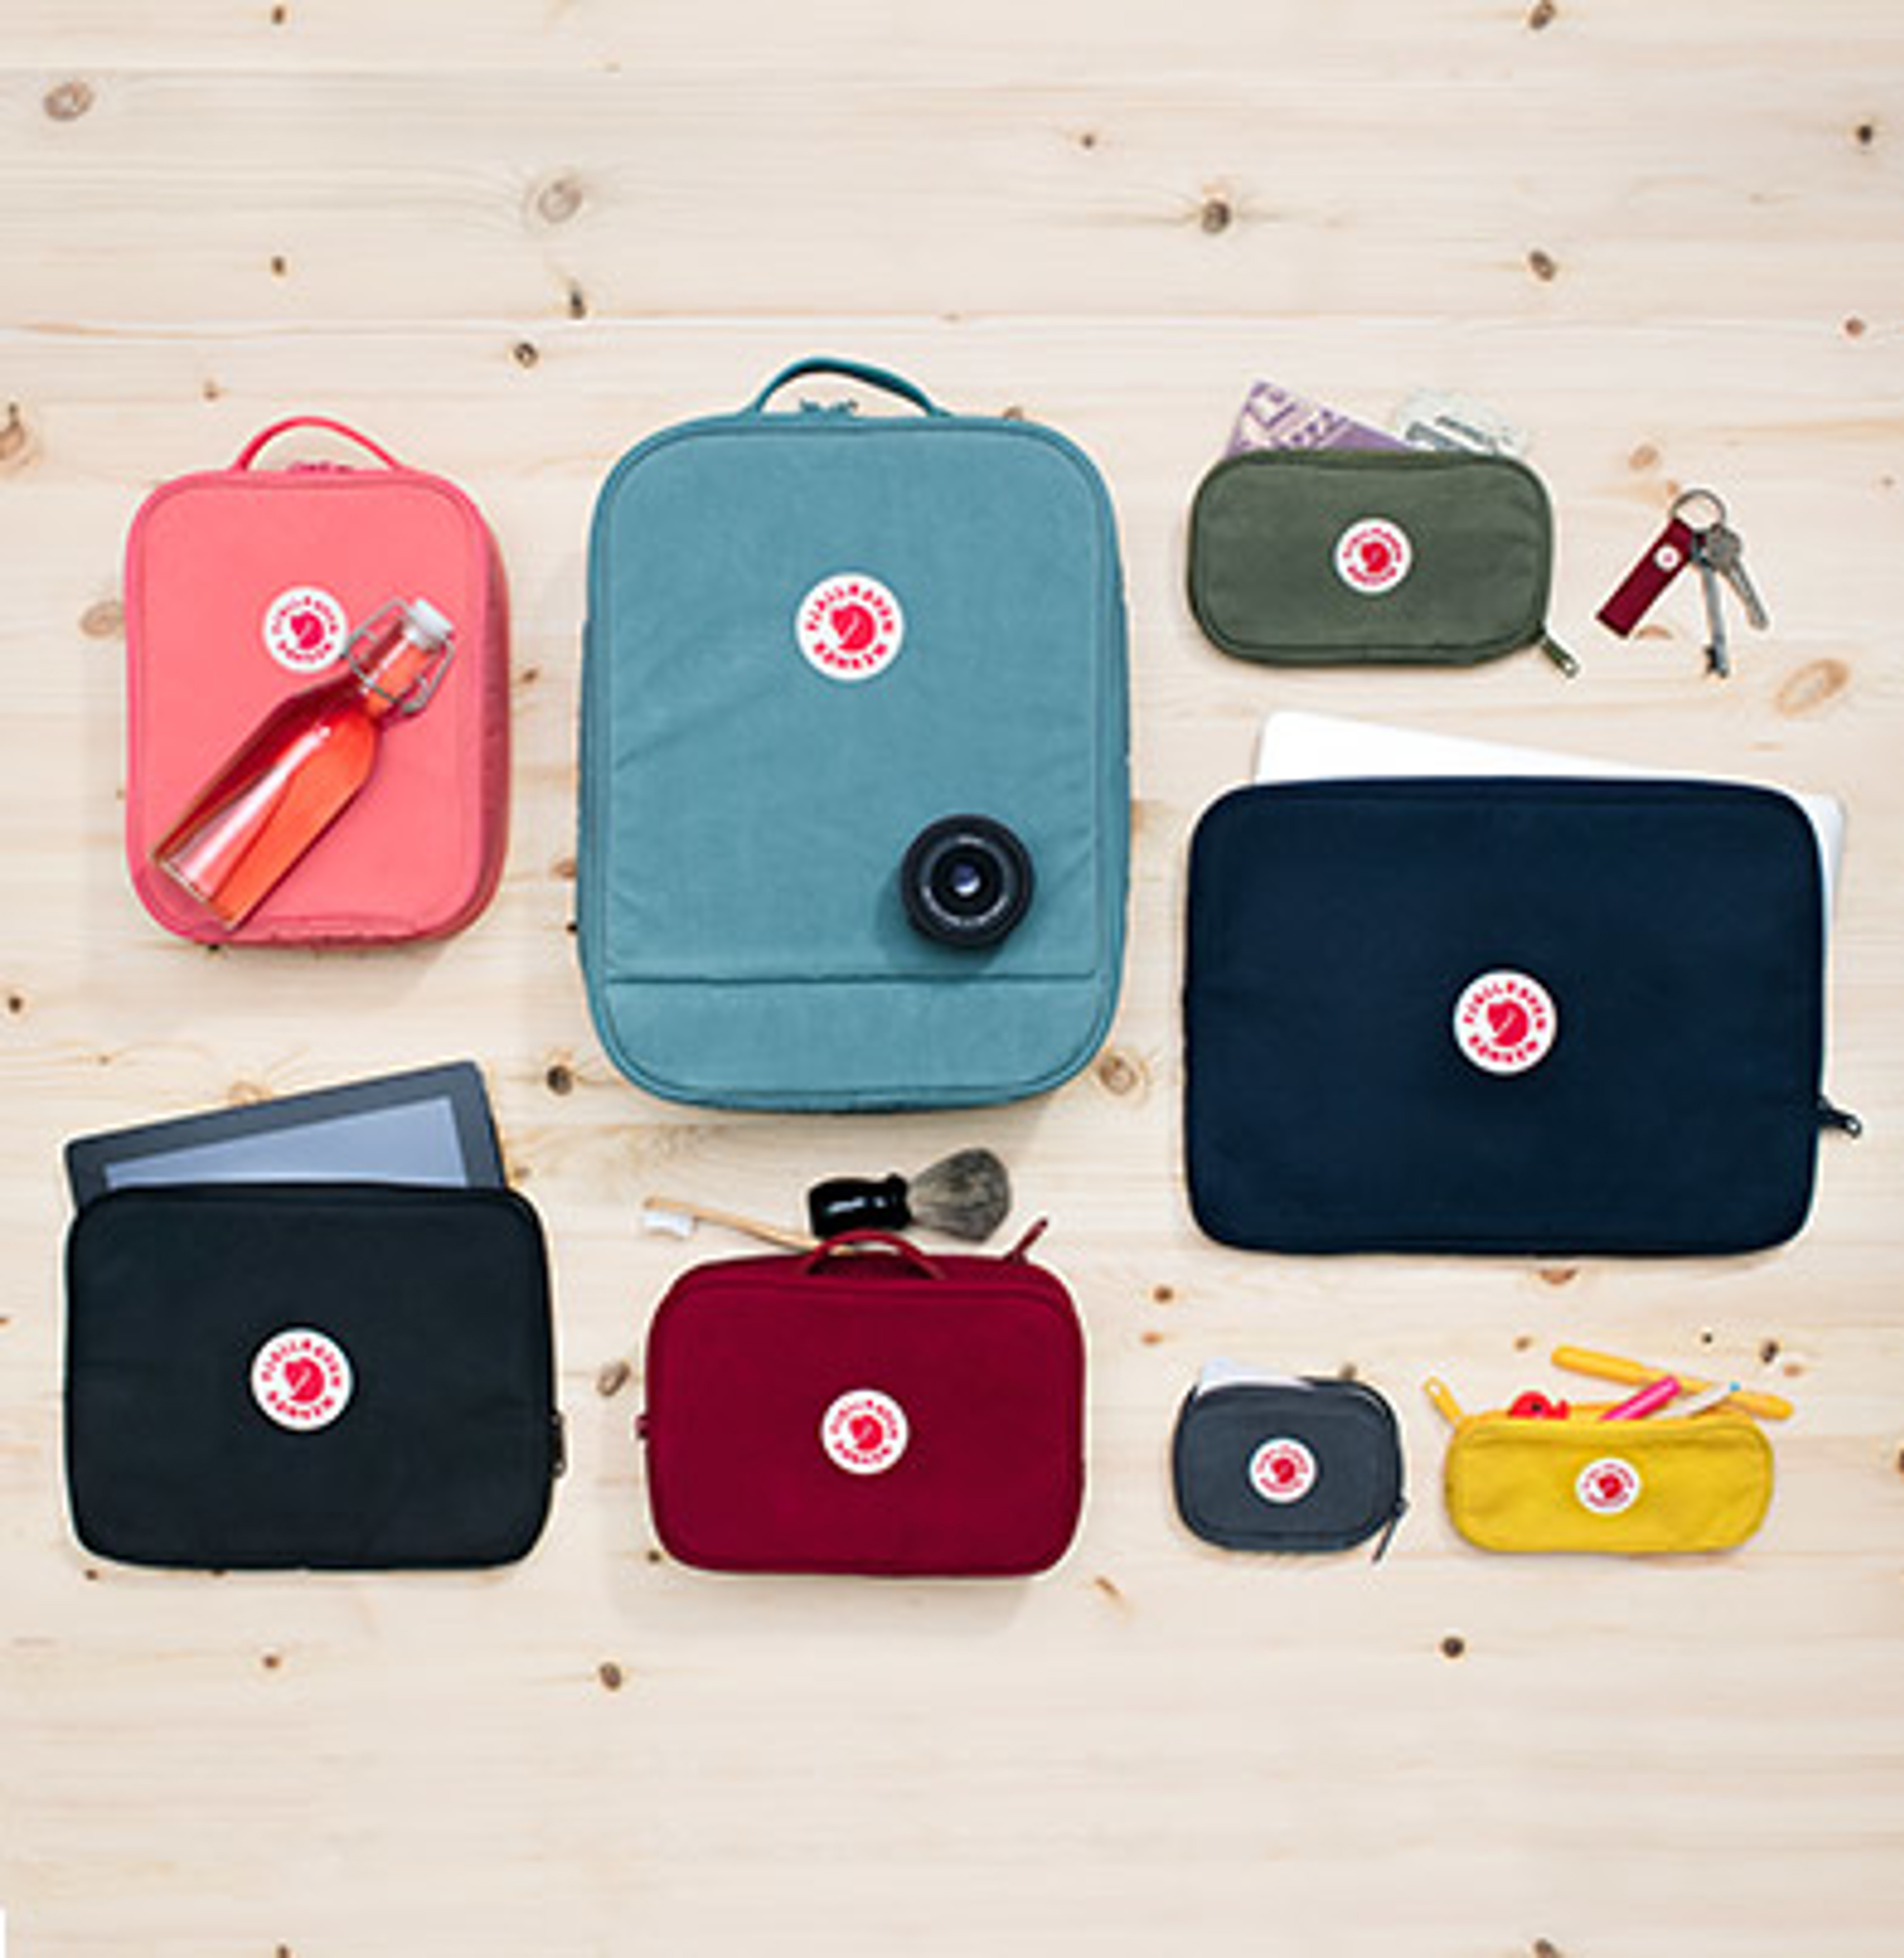 image of several fjallraven items